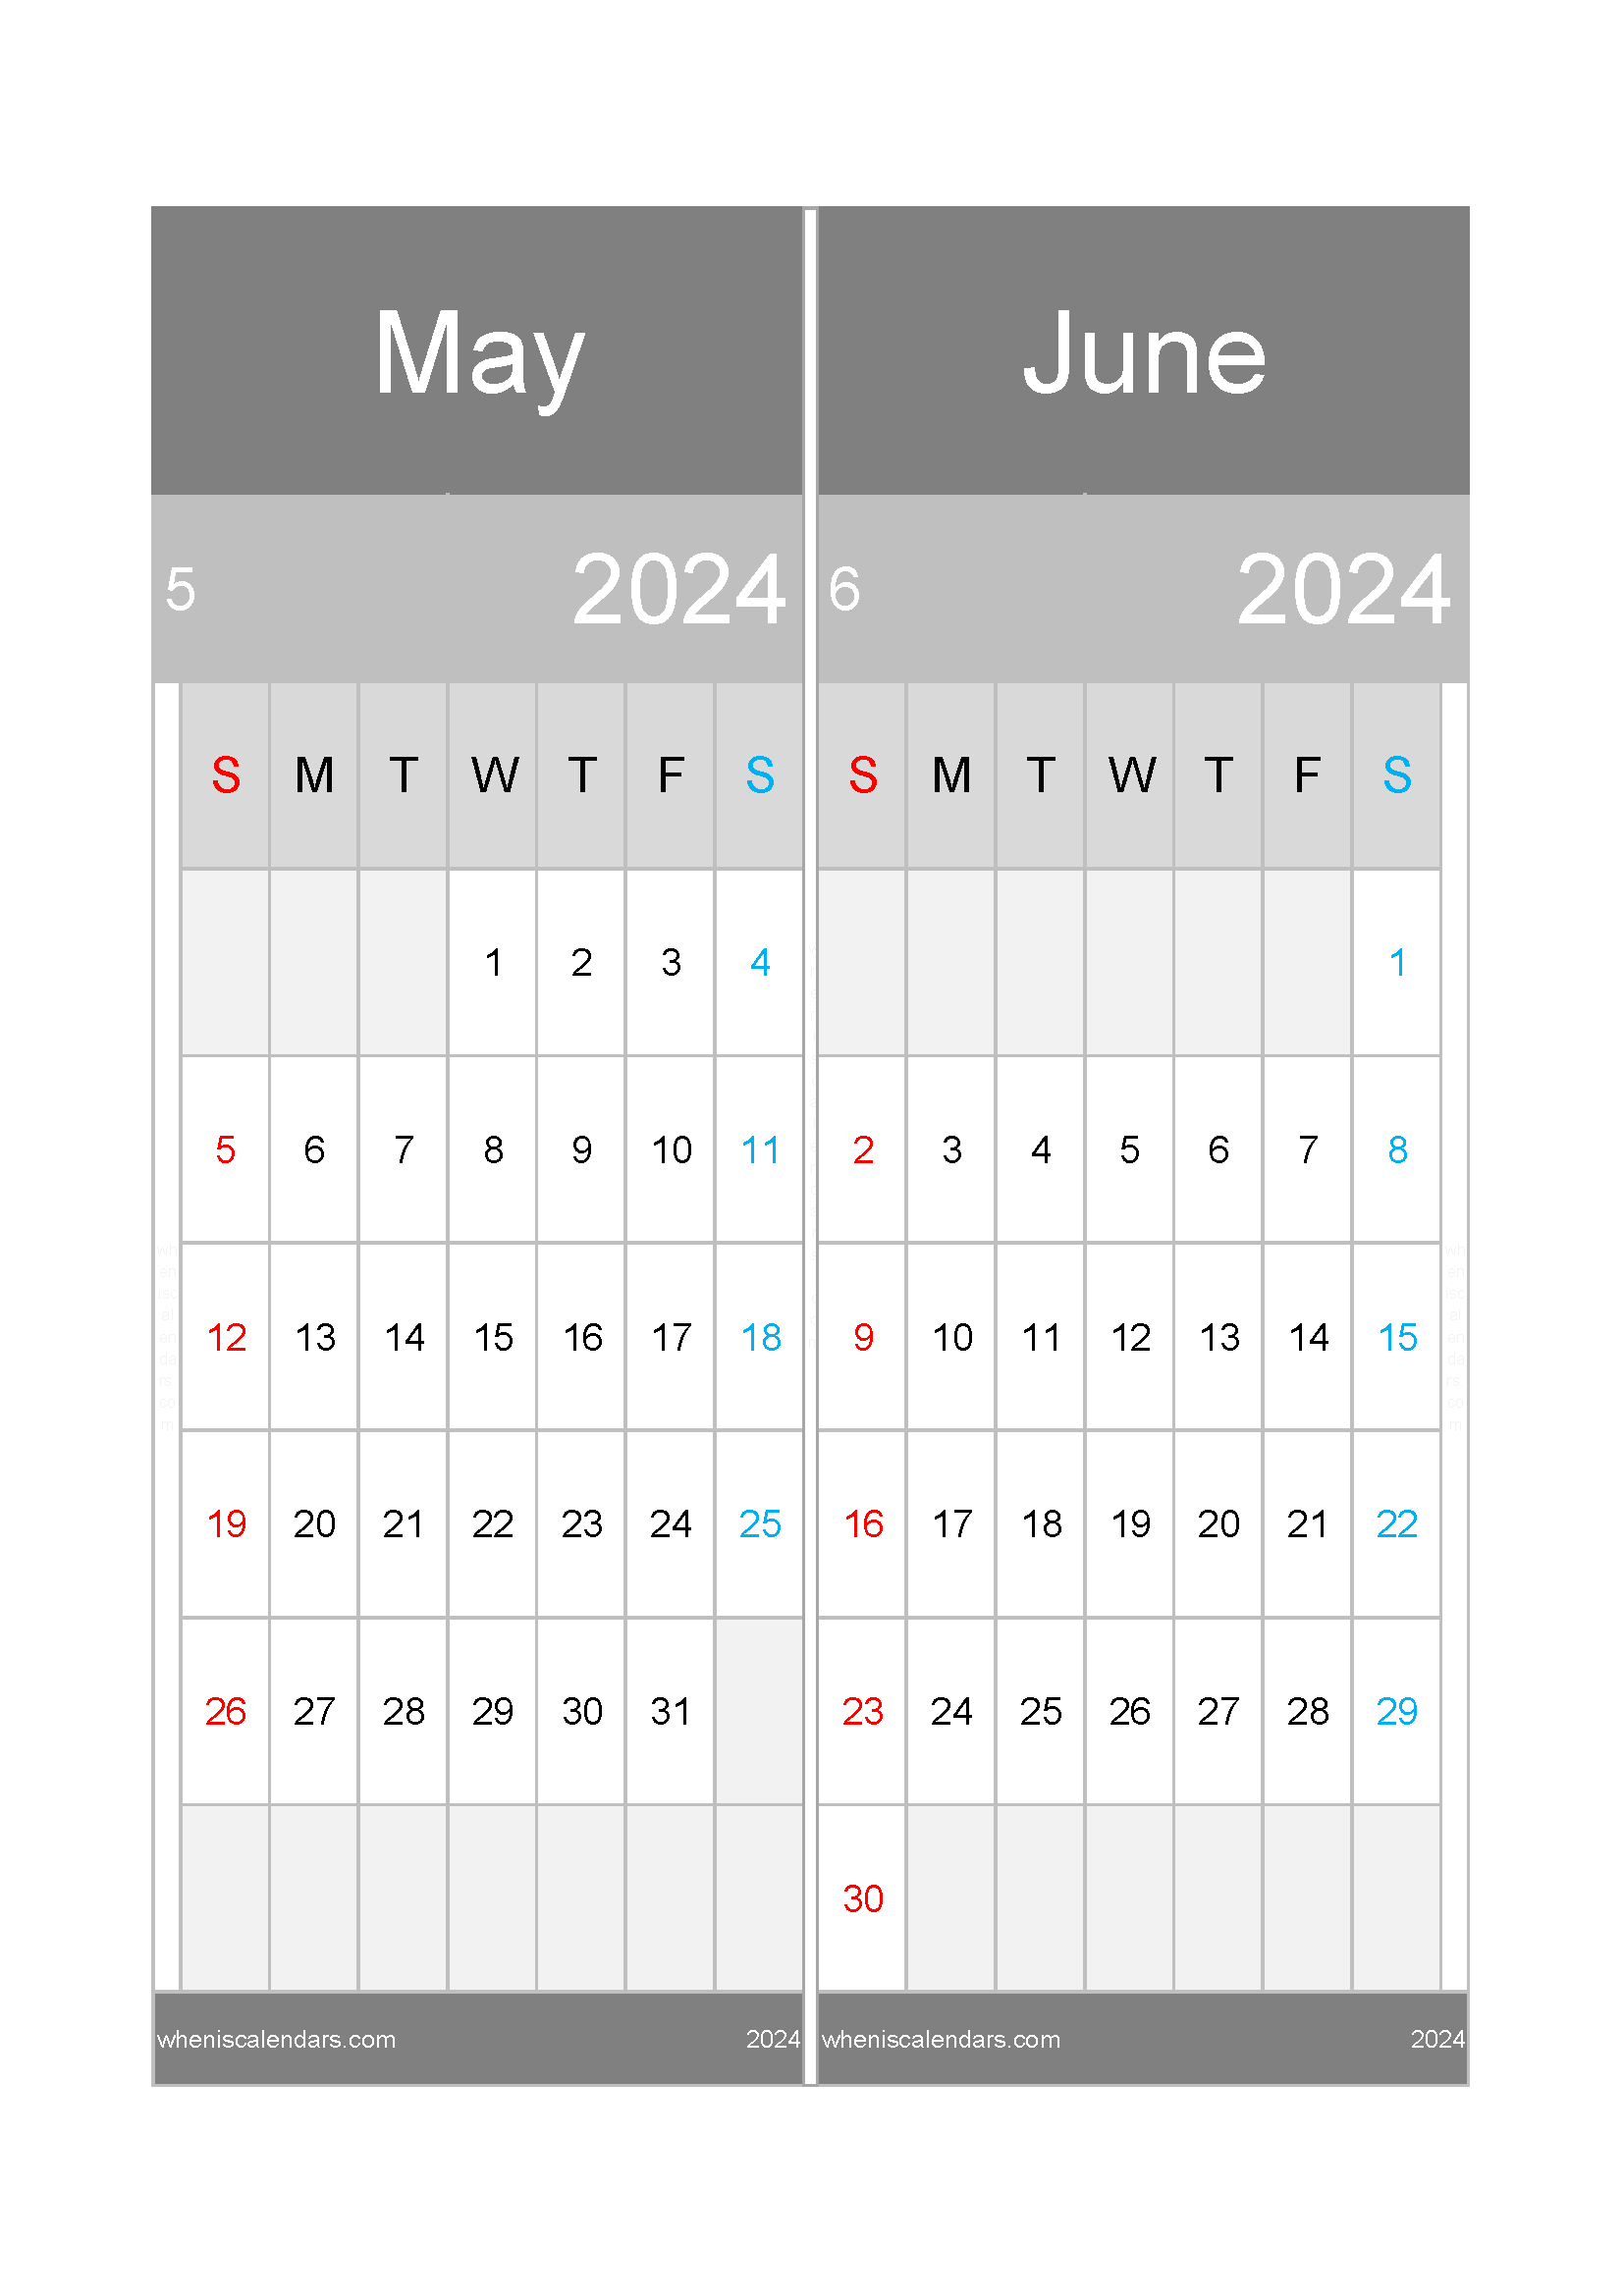 Download calendar for May and June 2024 A4 MJ24019